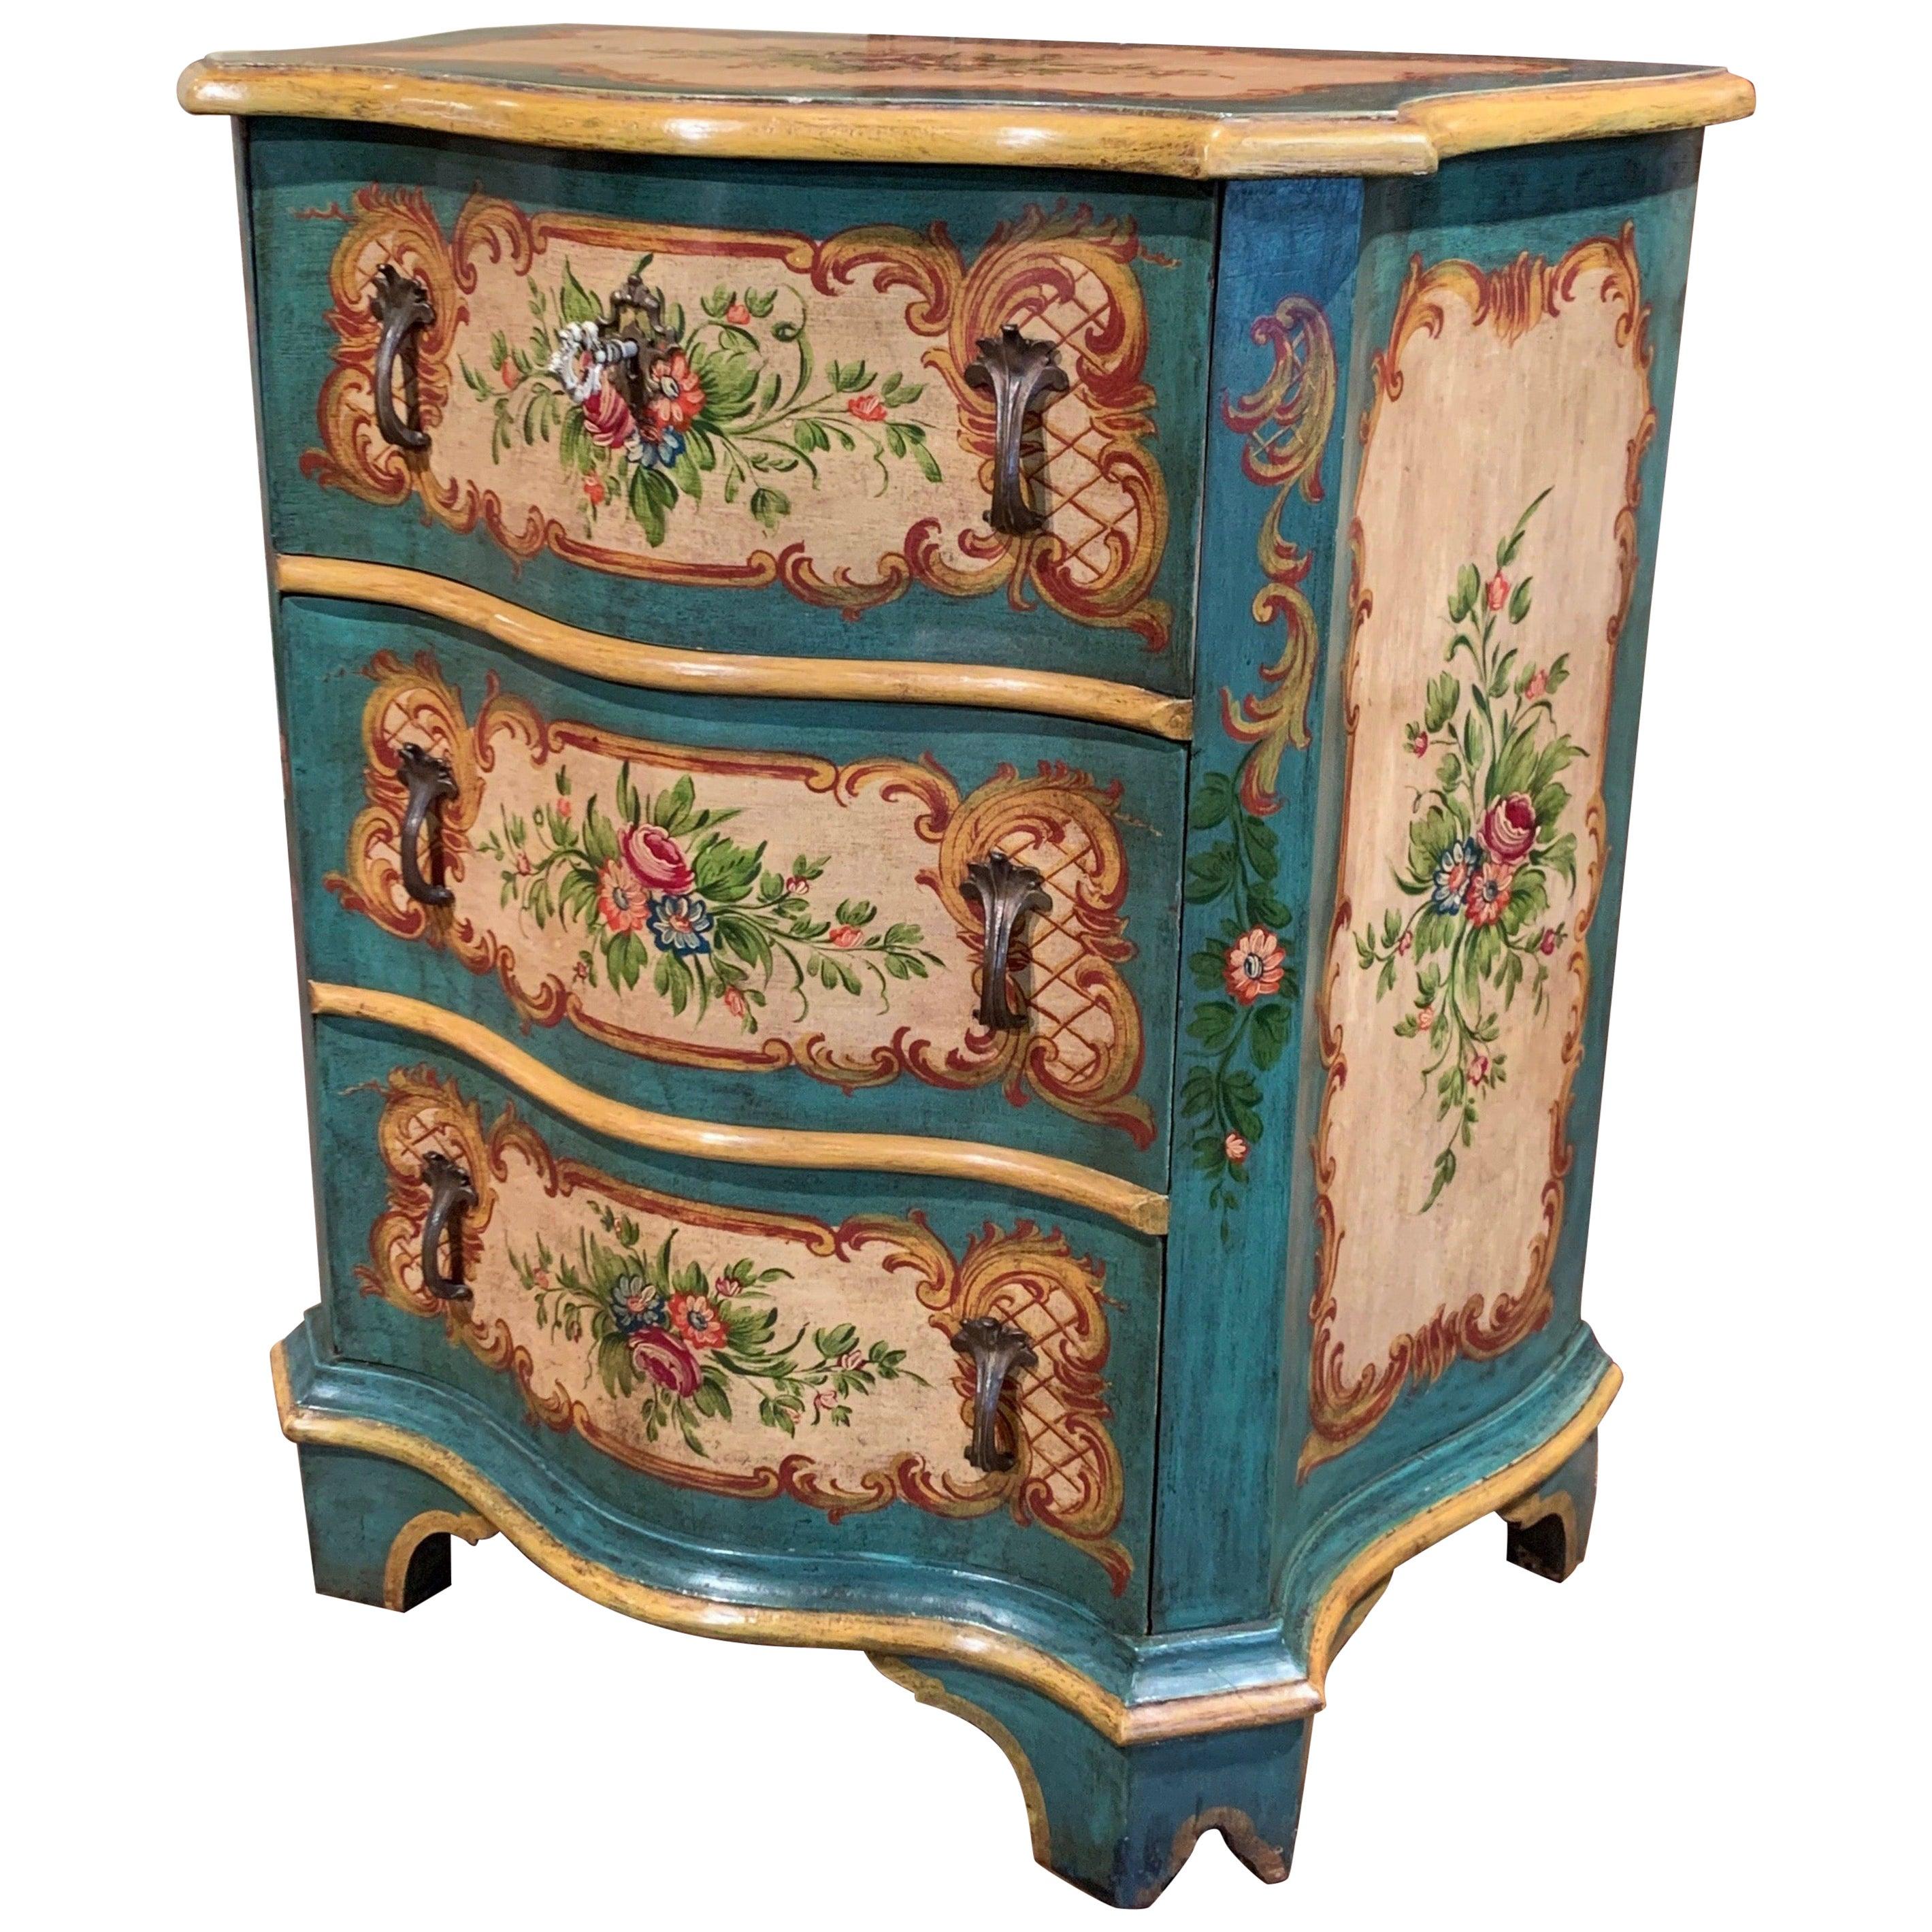 Mid-20th Century Venetian Serpentine Chest of Drawers with Painted Floral Decor